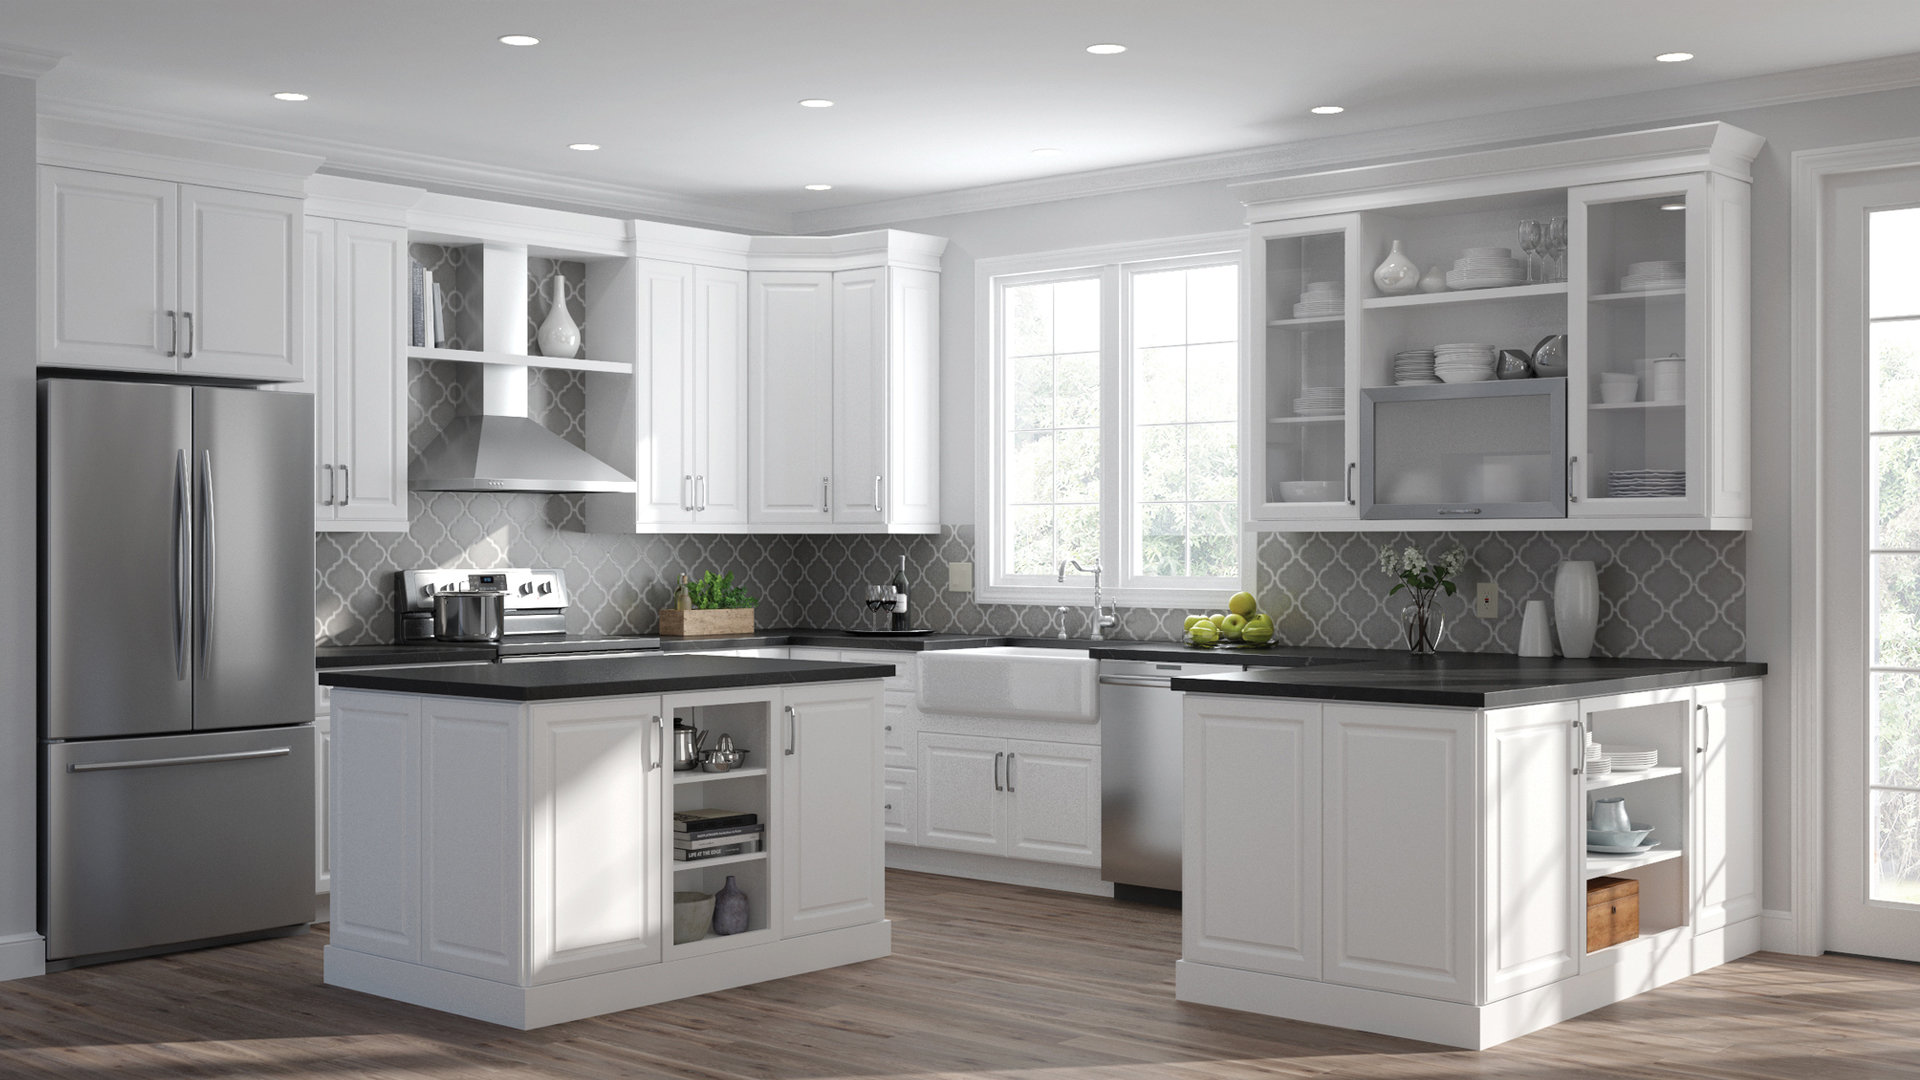 Elgin Wall Cabinets In White Kitchen The Home Depot